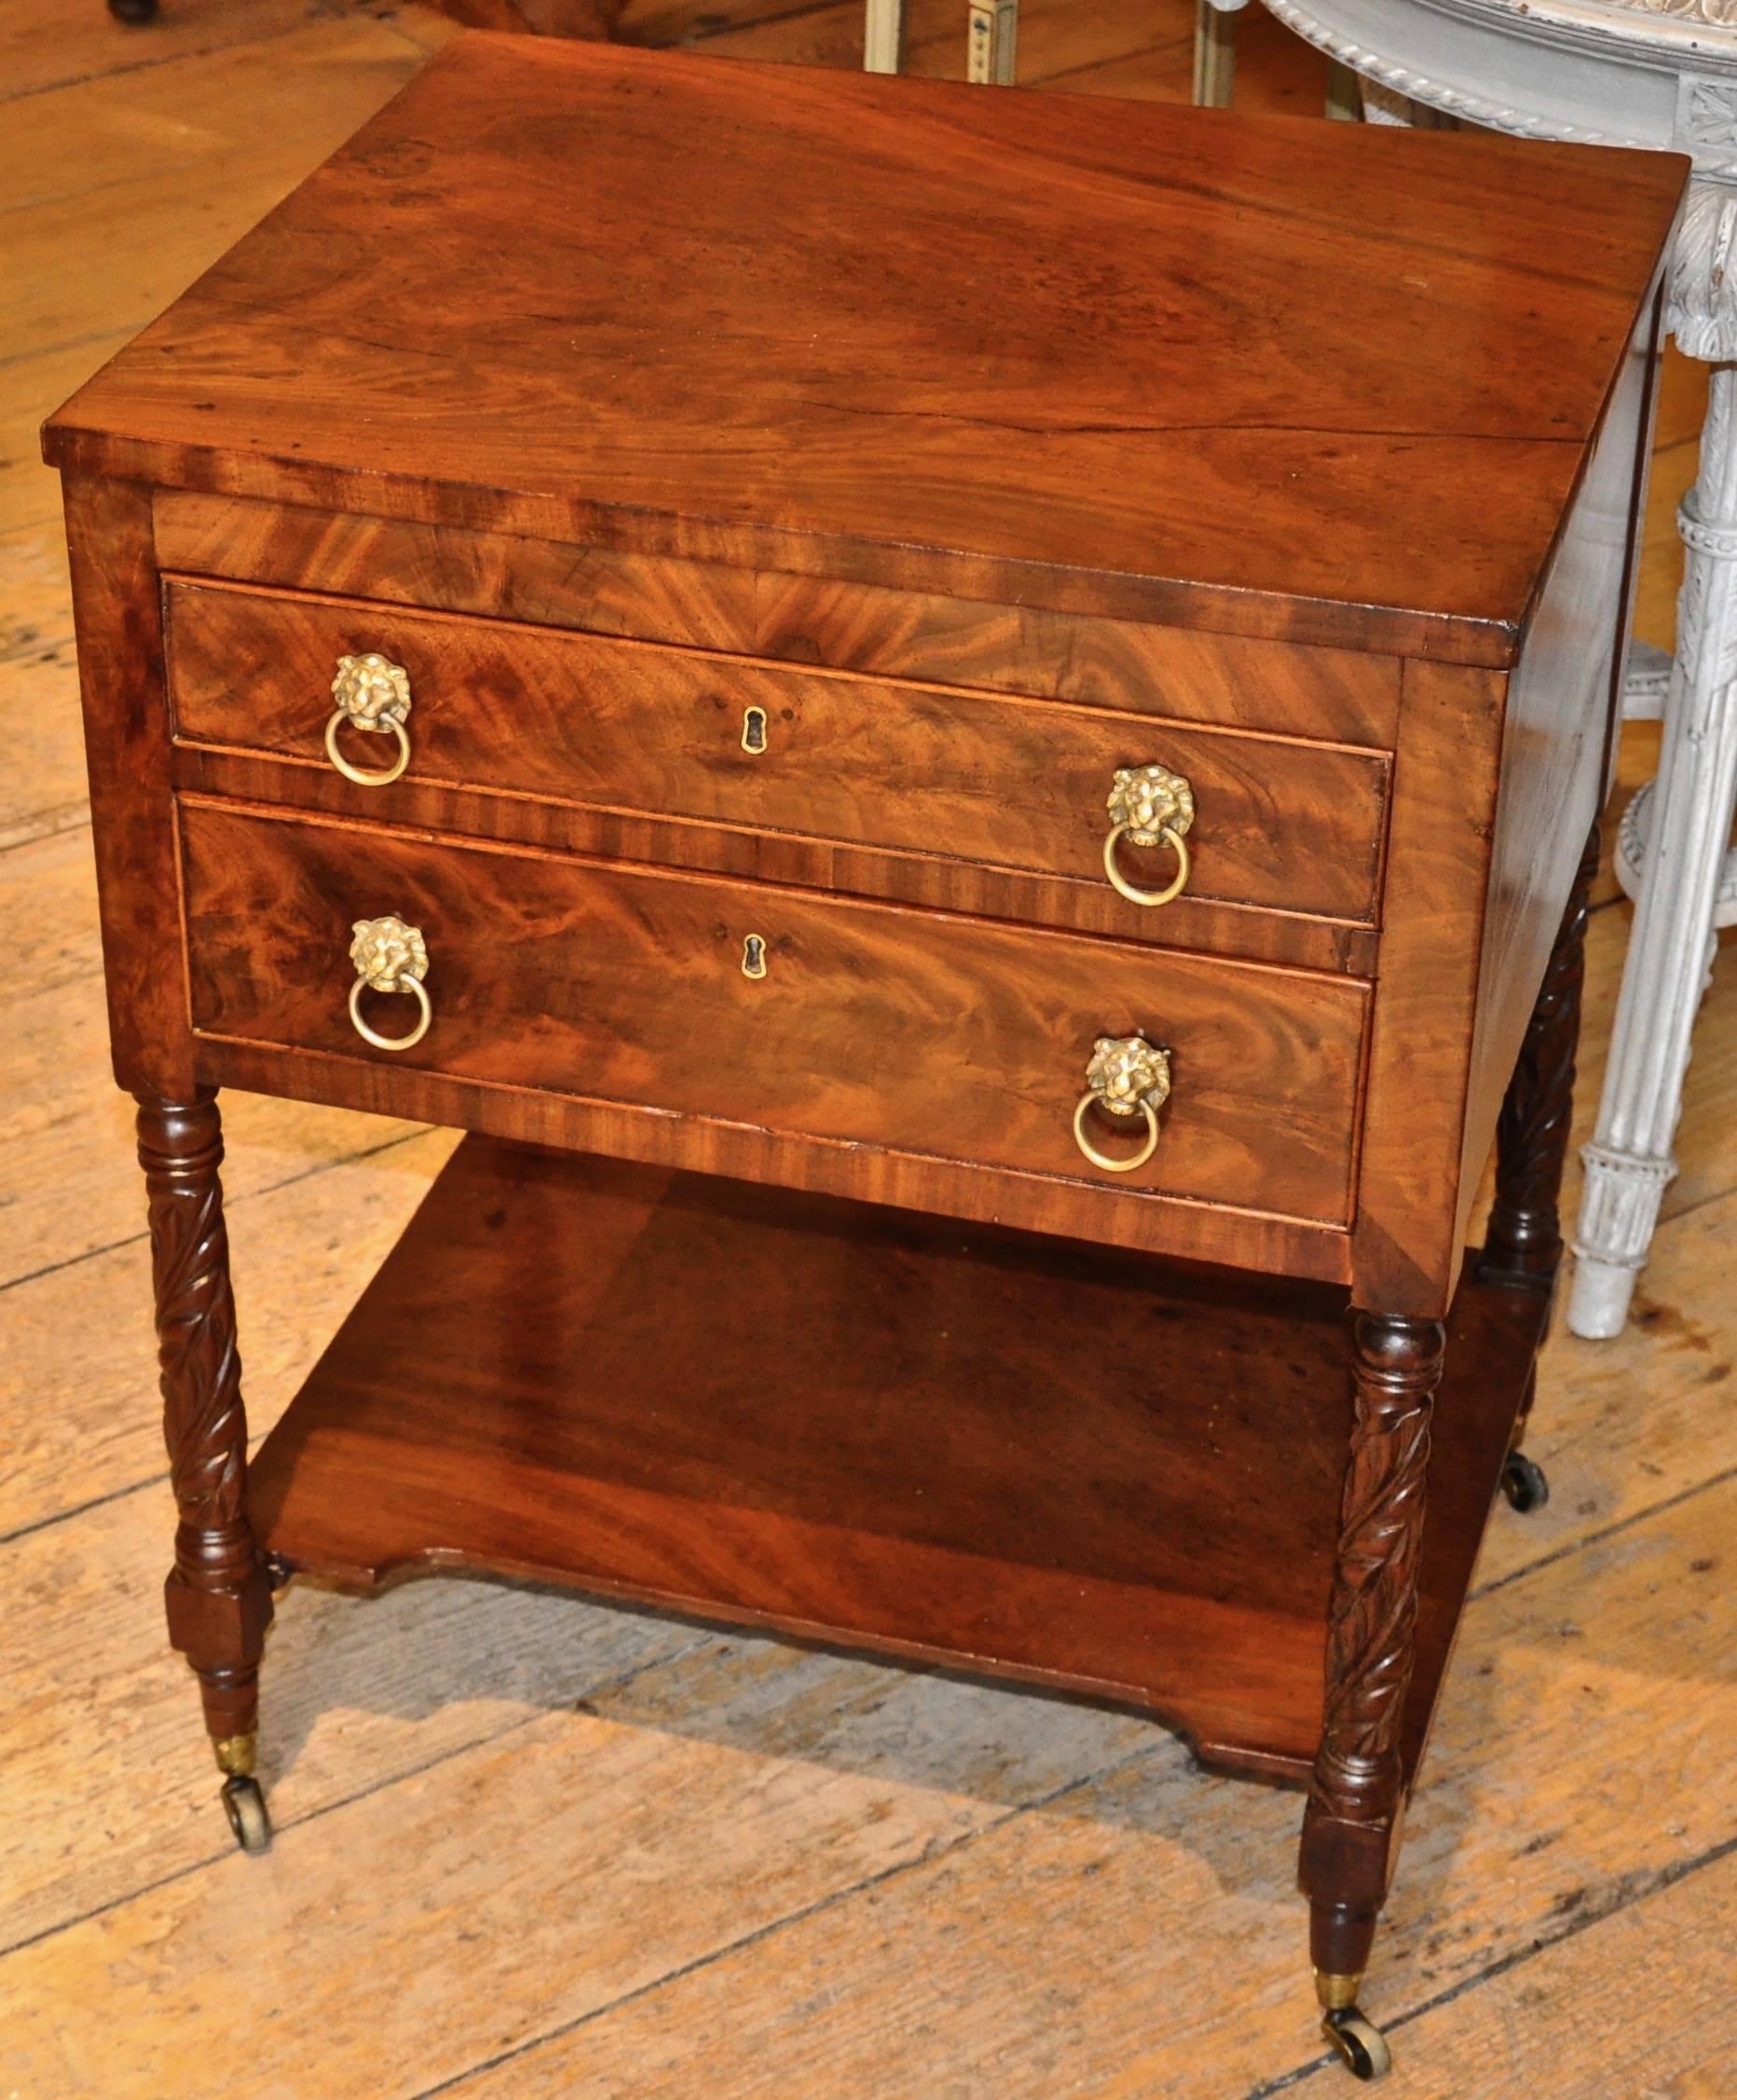 Period Federal mahogany stand or side table

Two drawers and bottom shelf. Bookmatched crotch mahogany. Finished on all sides. Great size for end table or small server. Boston or Salem, Massachusetts.